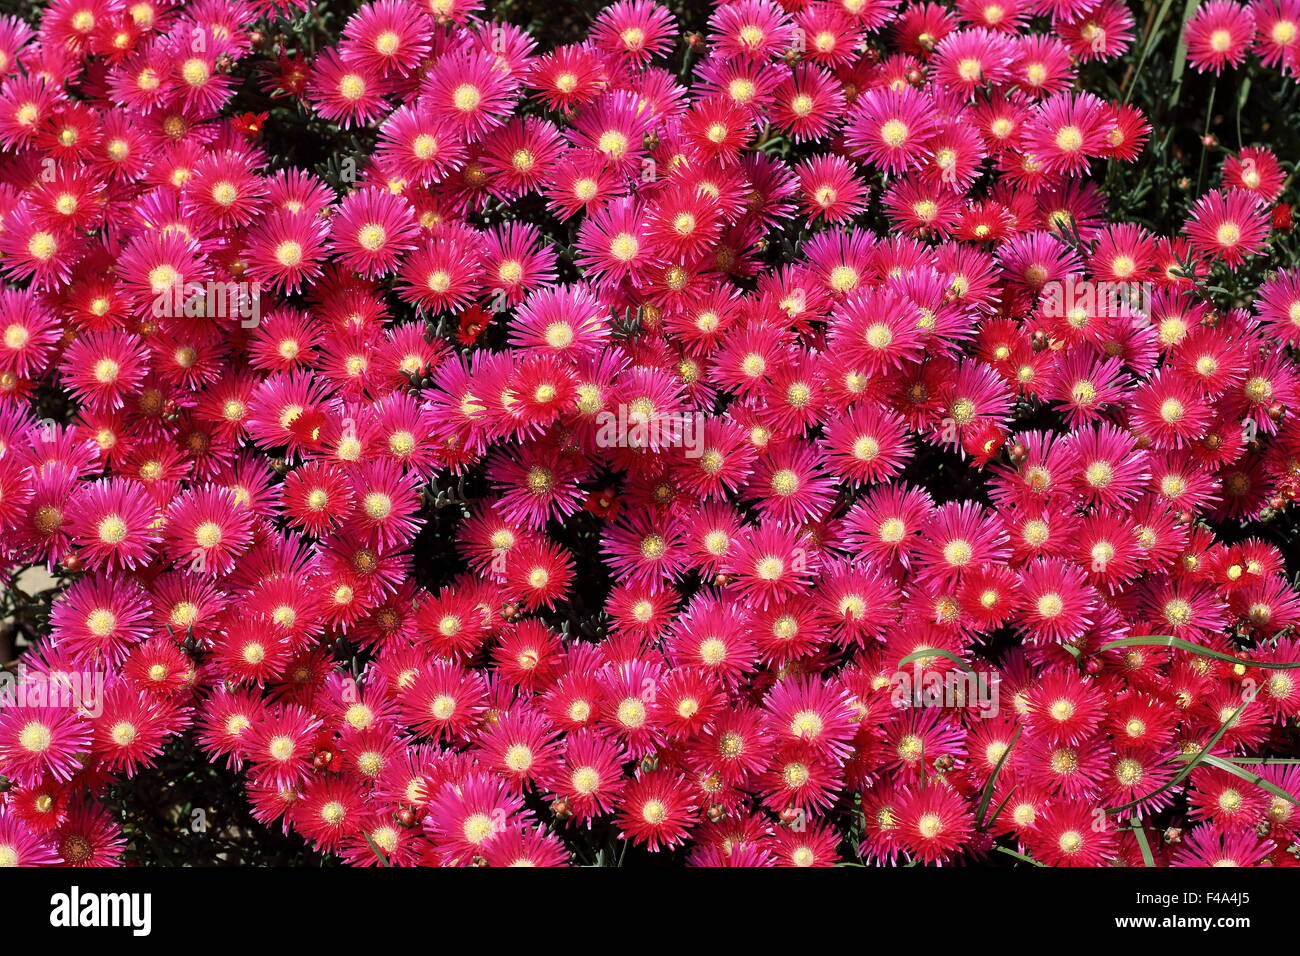 Red Pig face flowers or Mesembryanthemum , ice plant flowers, Livingstone Daisies in full bloom Stock Photo